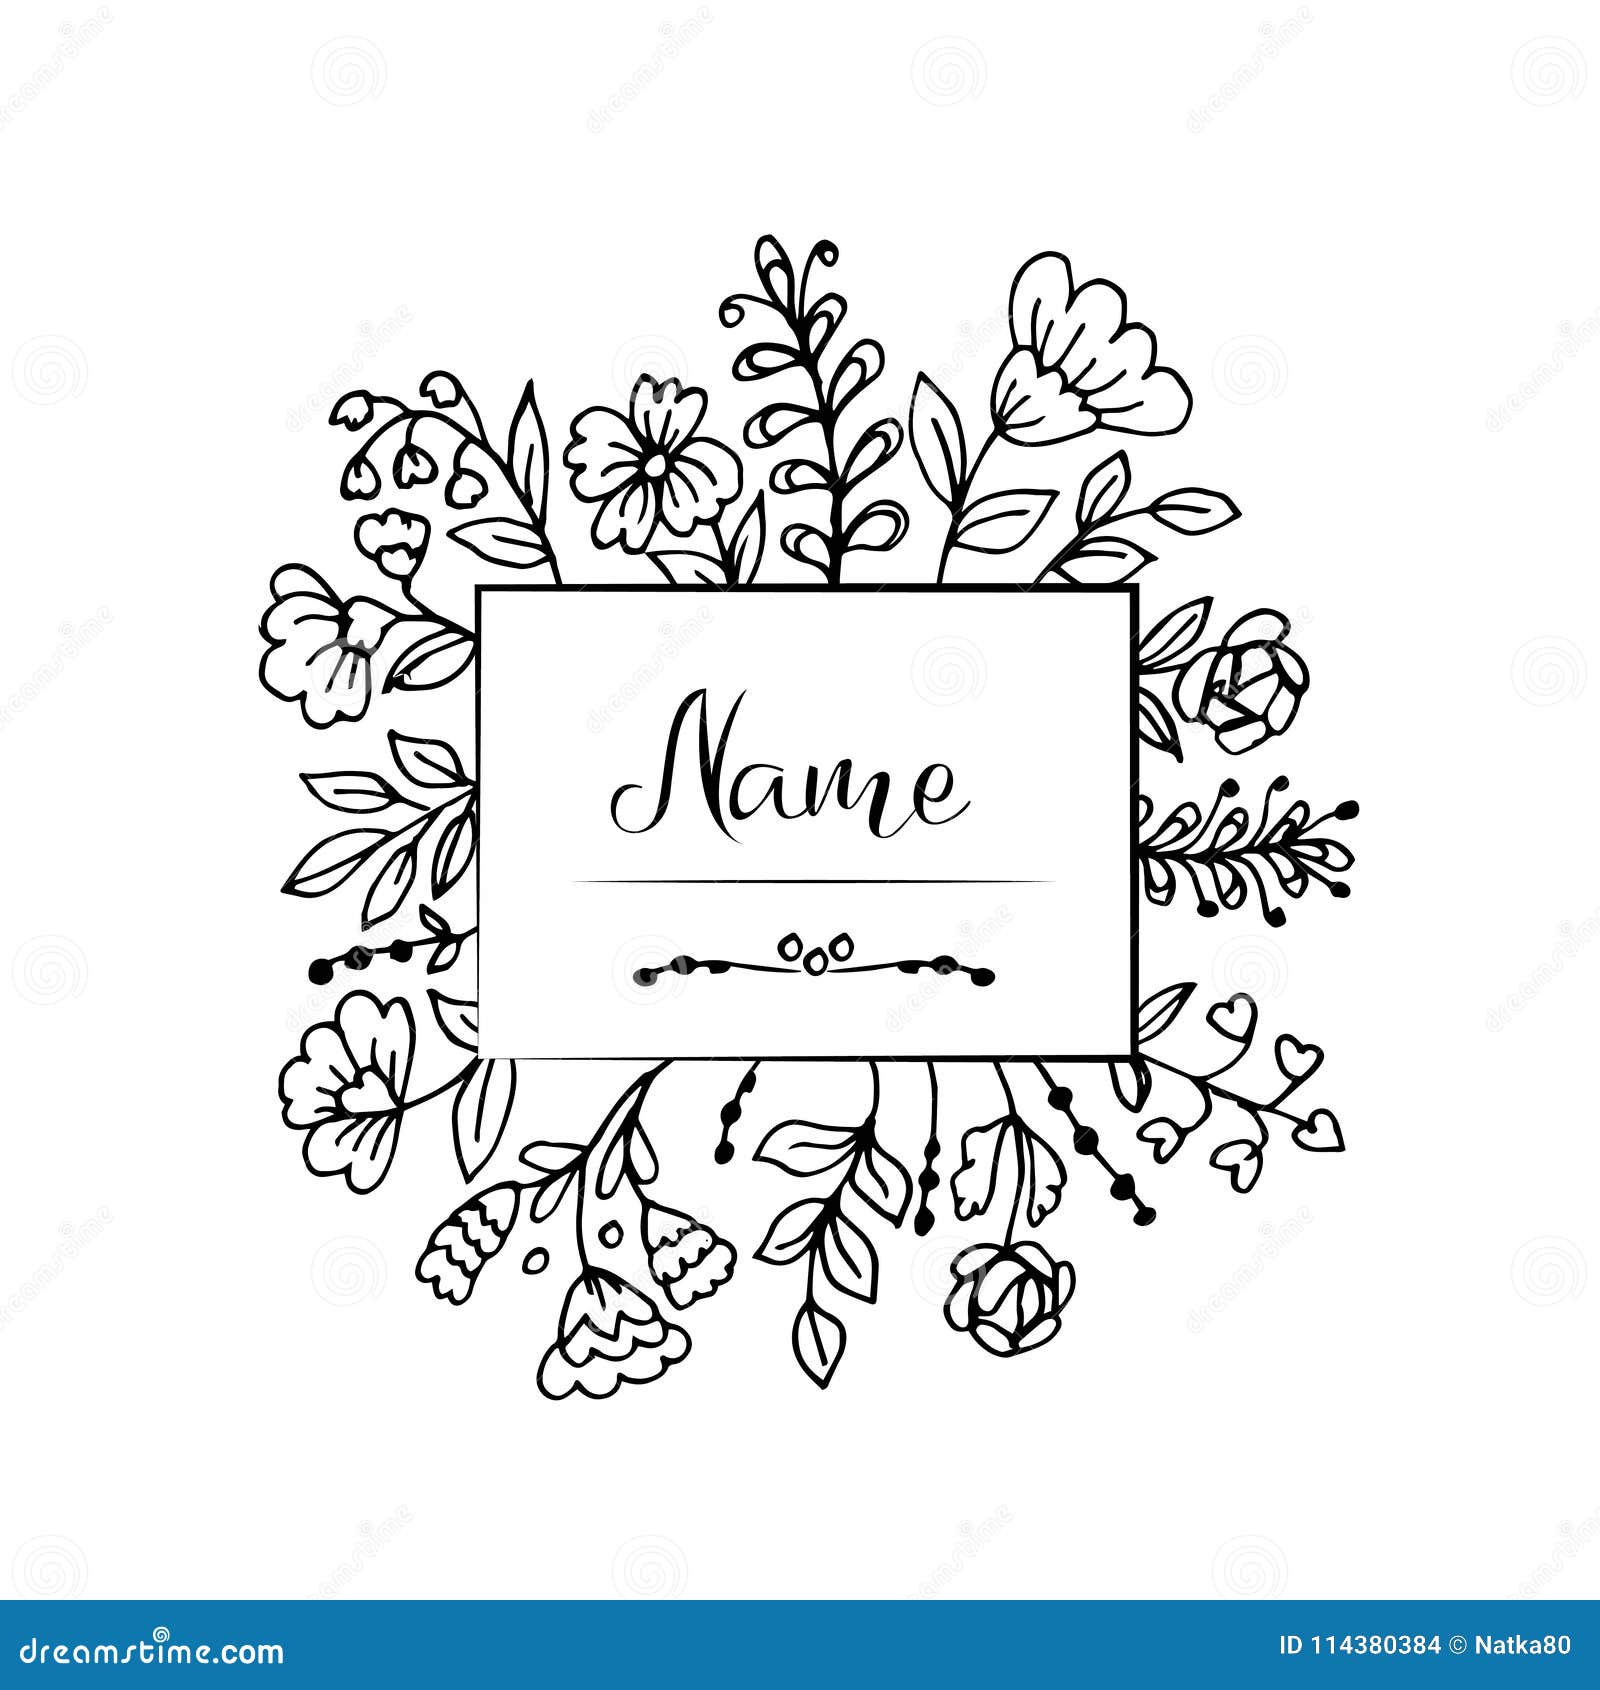 Doodle Flowers And Leaves Label Stock Vector Illustration Of Label